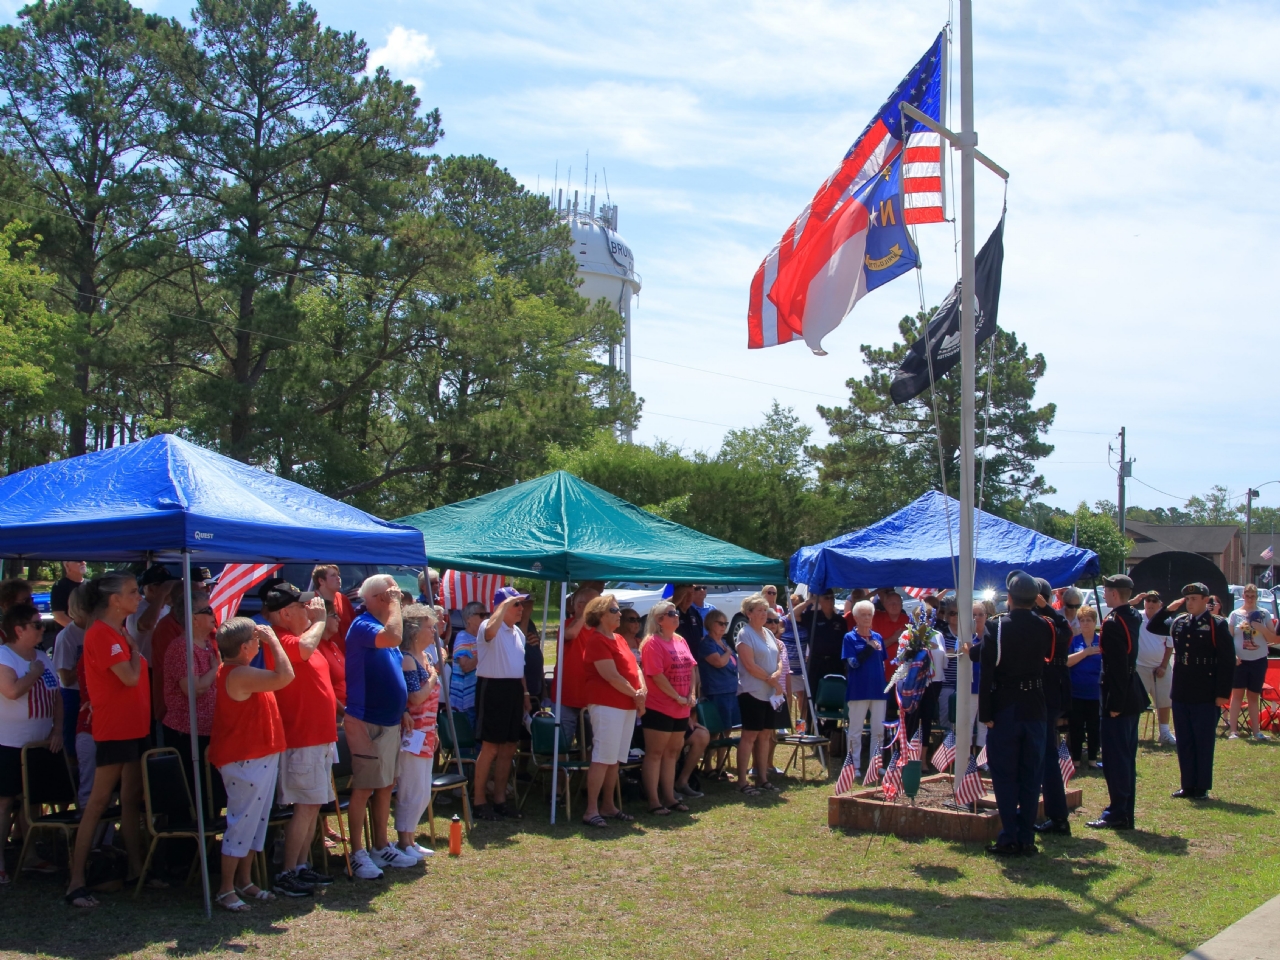 Large Crowds gathered at the Calabash VFW Post 7288 for the annual Memorial Day Ceremony.